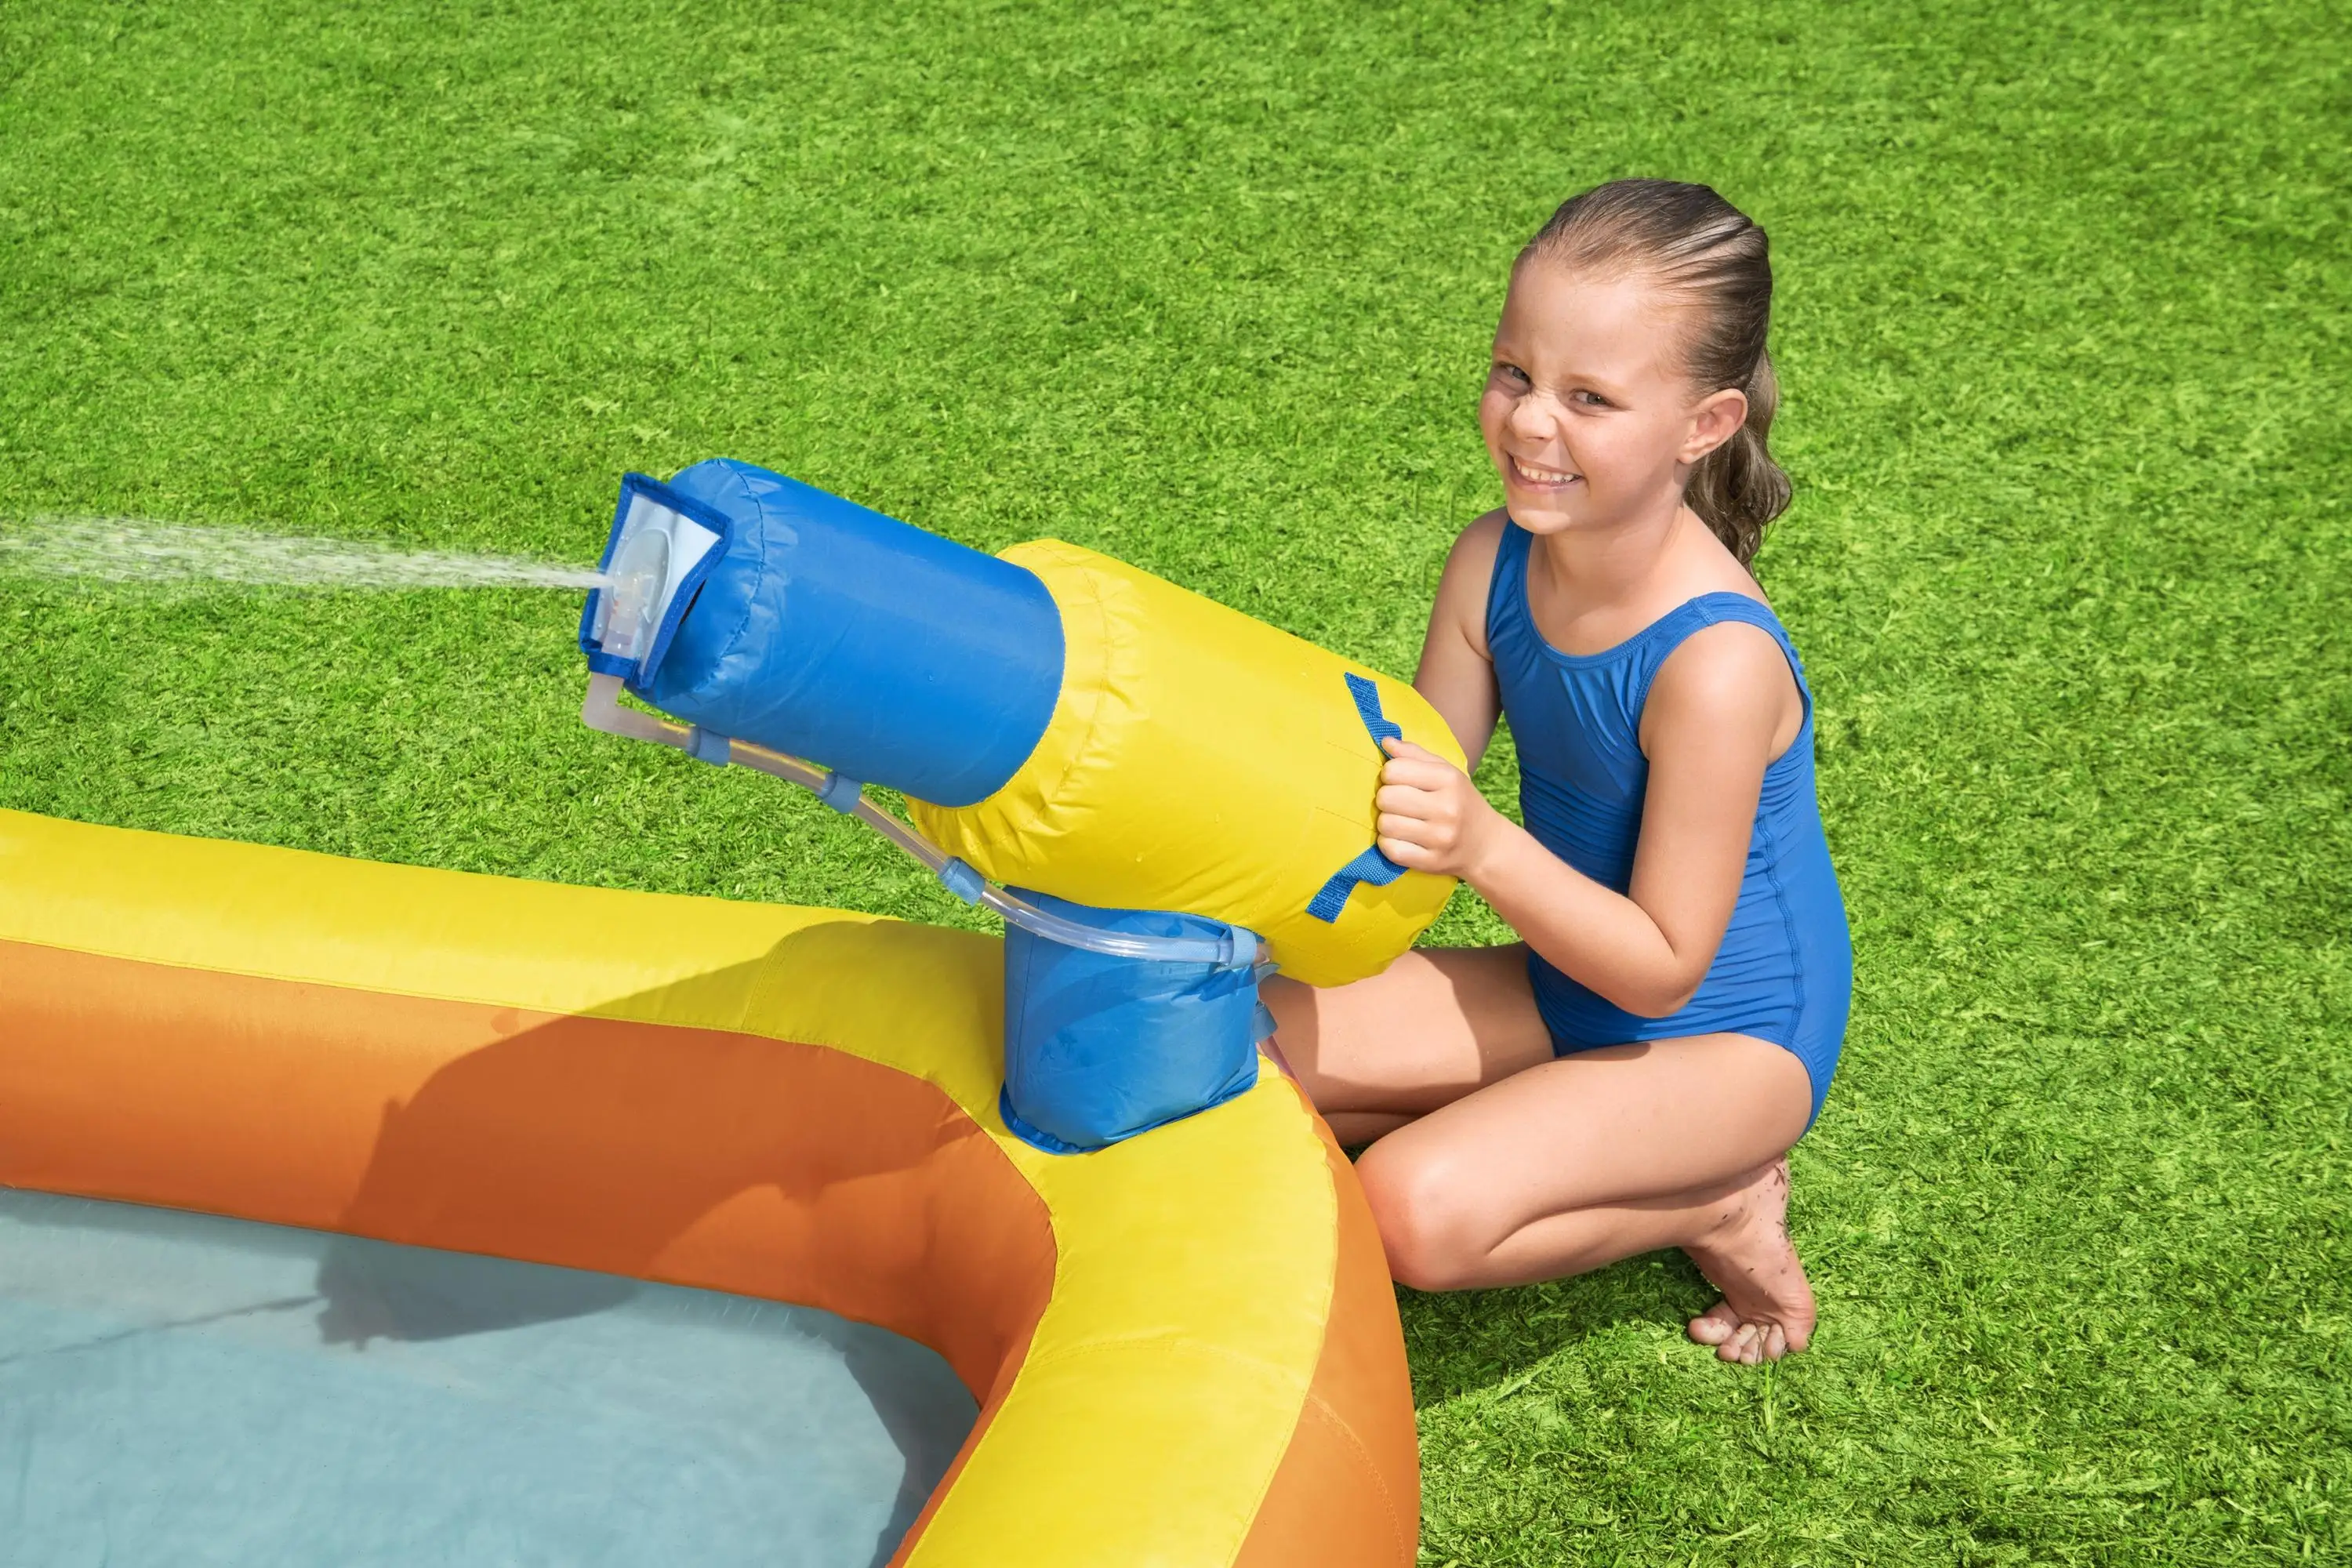 Bestway 53377 Super Speedway Mega Water Park - Buy Inflatable Amusement Water Park,Water Park With Slide For Kid,Bestway 53377 Product on Alibaba.com